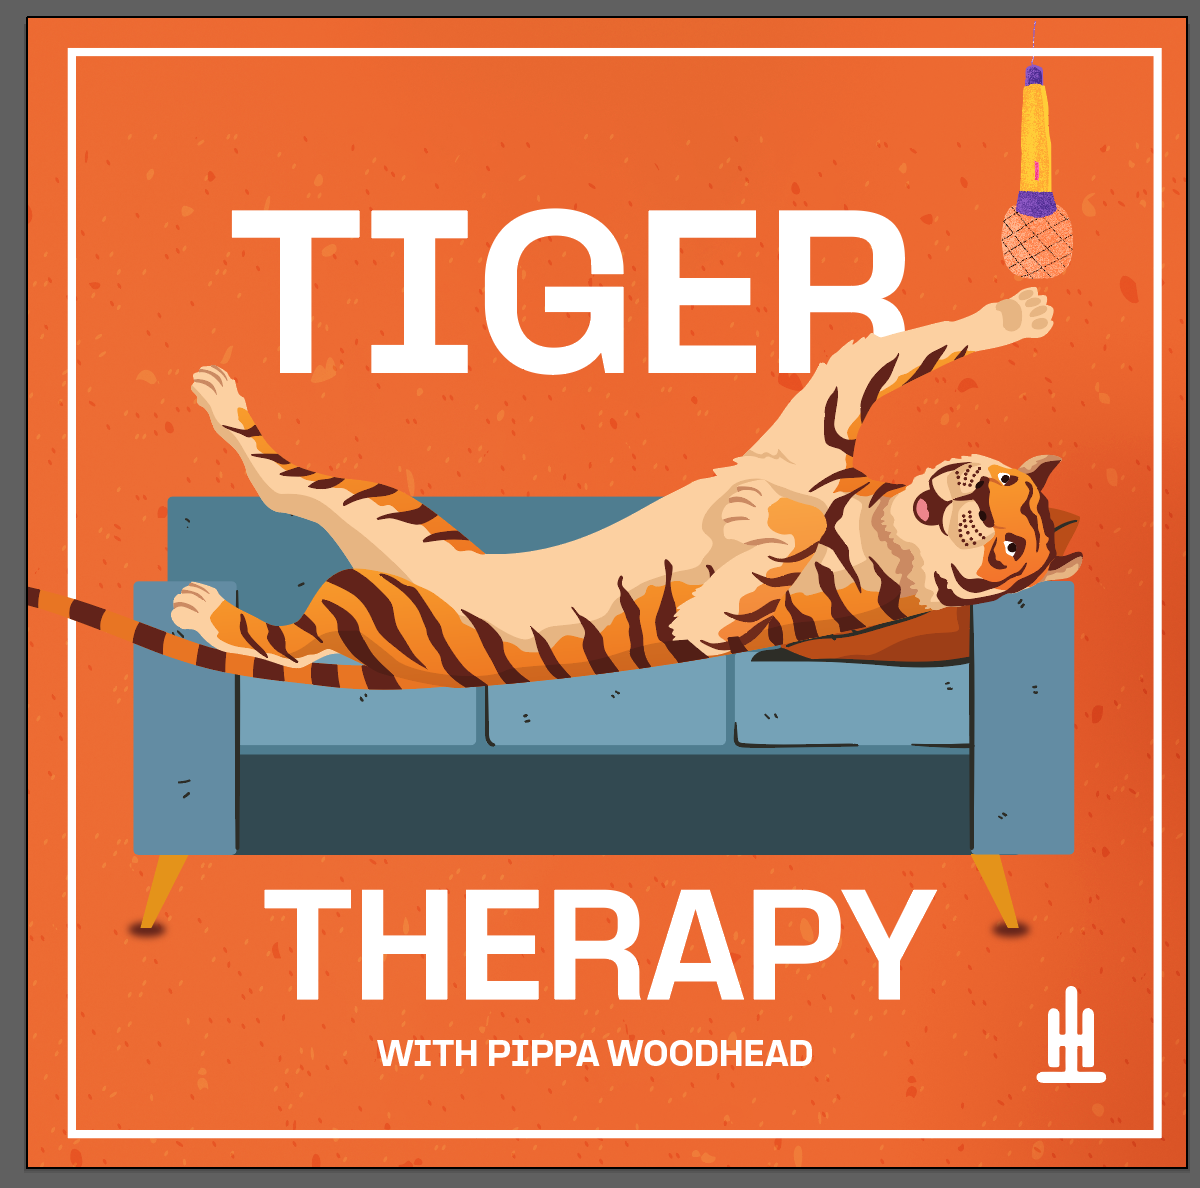 Zen Millionaire Ken Honda Exposes the Money Mindset that May Be Holding People Back on ‘Tiger Therapy’ Podcast